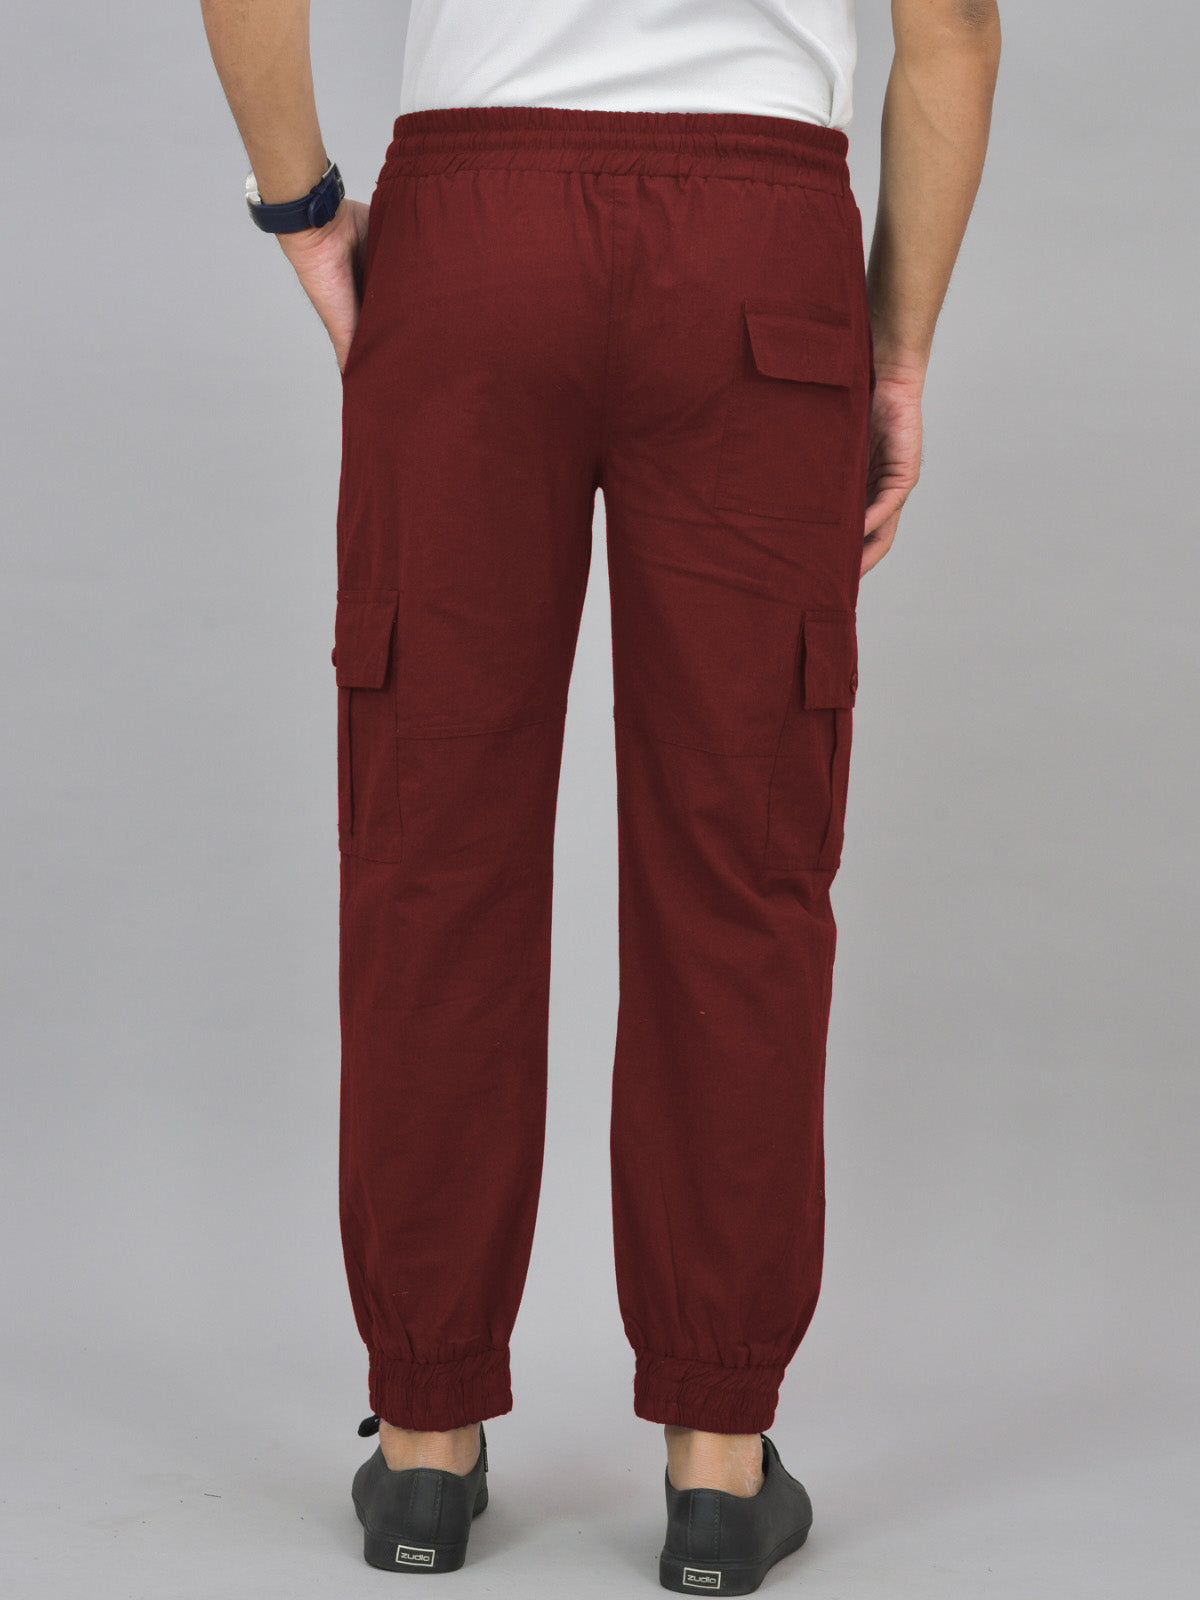 Combo Pack Of Mens Wine And Grey Five Pocket Cotton Cargo Pants